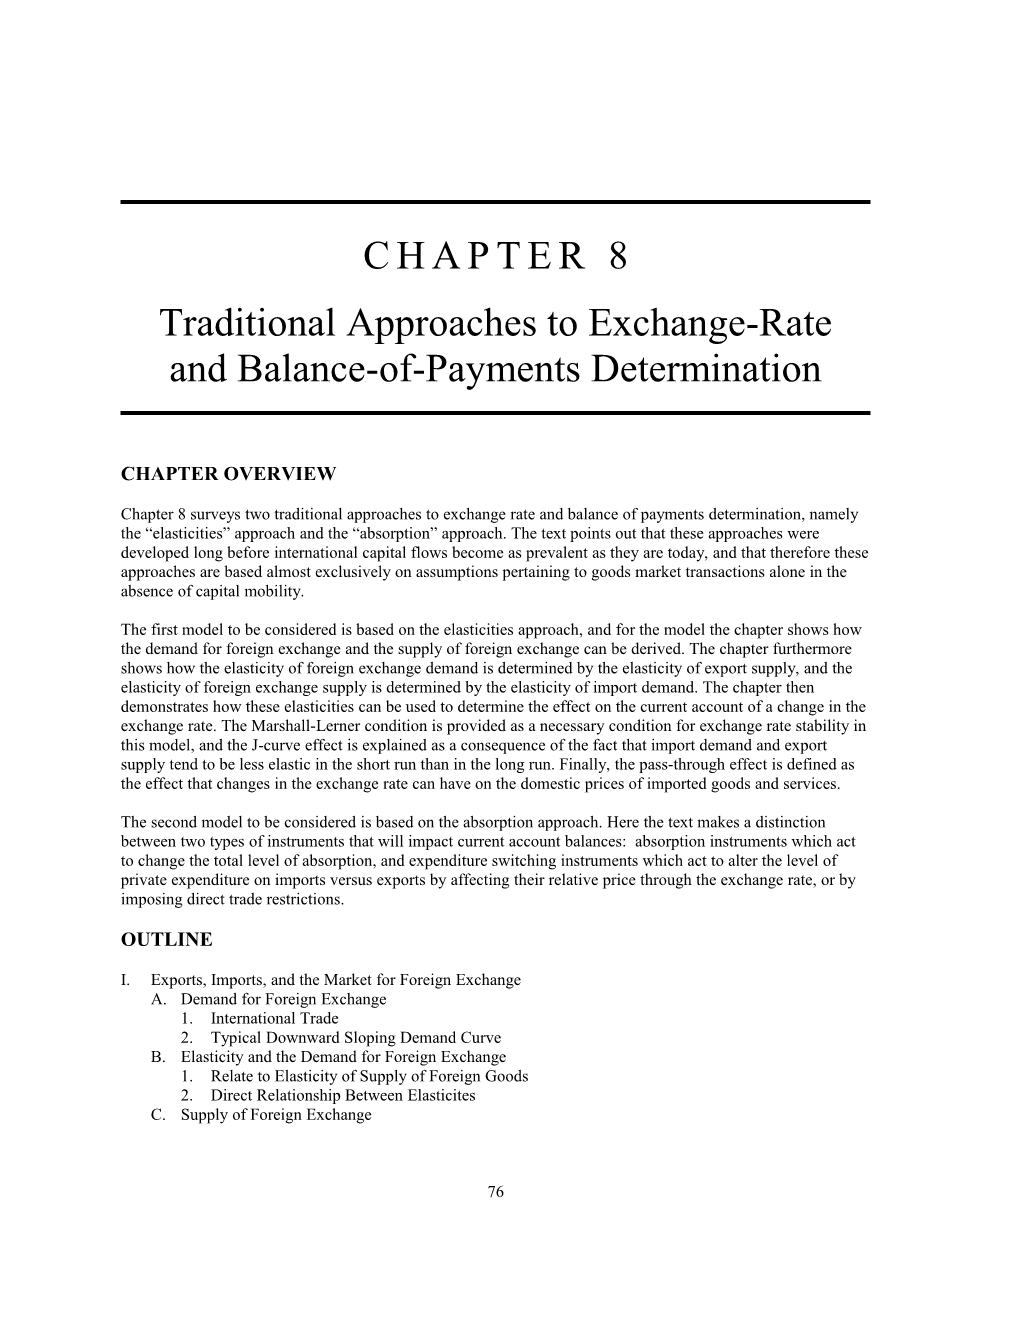 Traditional Approaches to Exchange-Rate